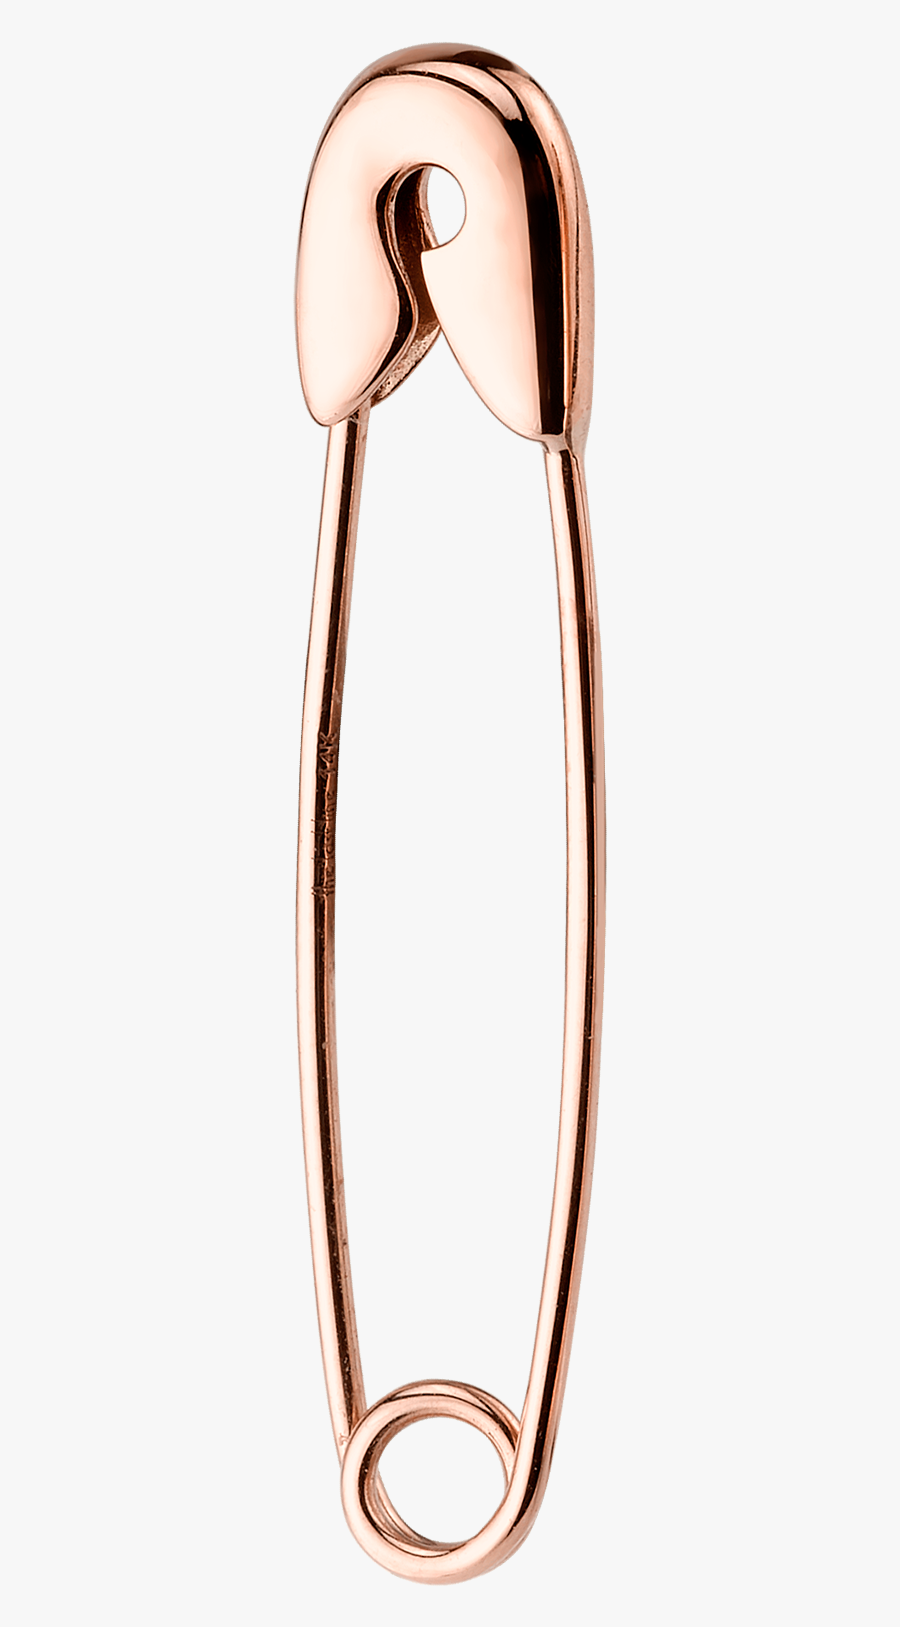 Safety Pin"s Png Image - Body Jewelry, Transparent Clipart